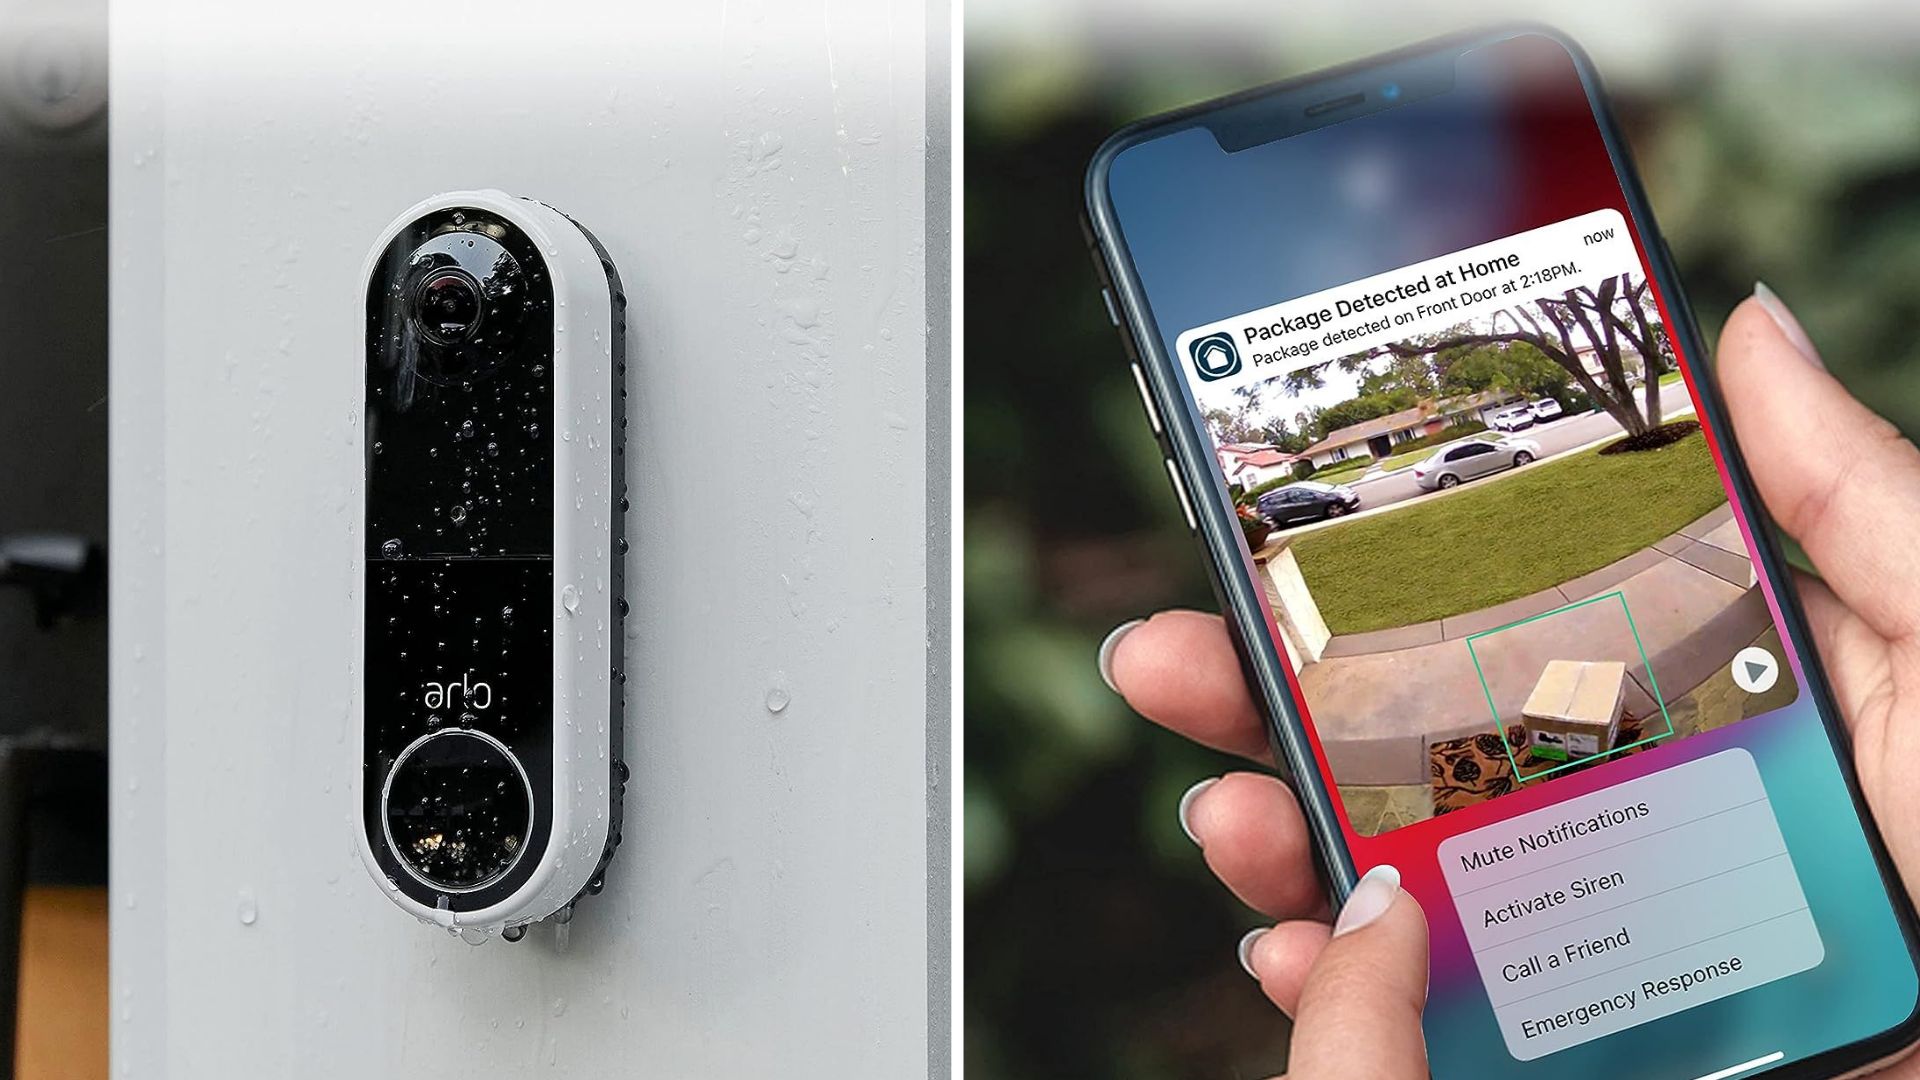 10 genuinely useful things you can do with a smart doorbell - Which?